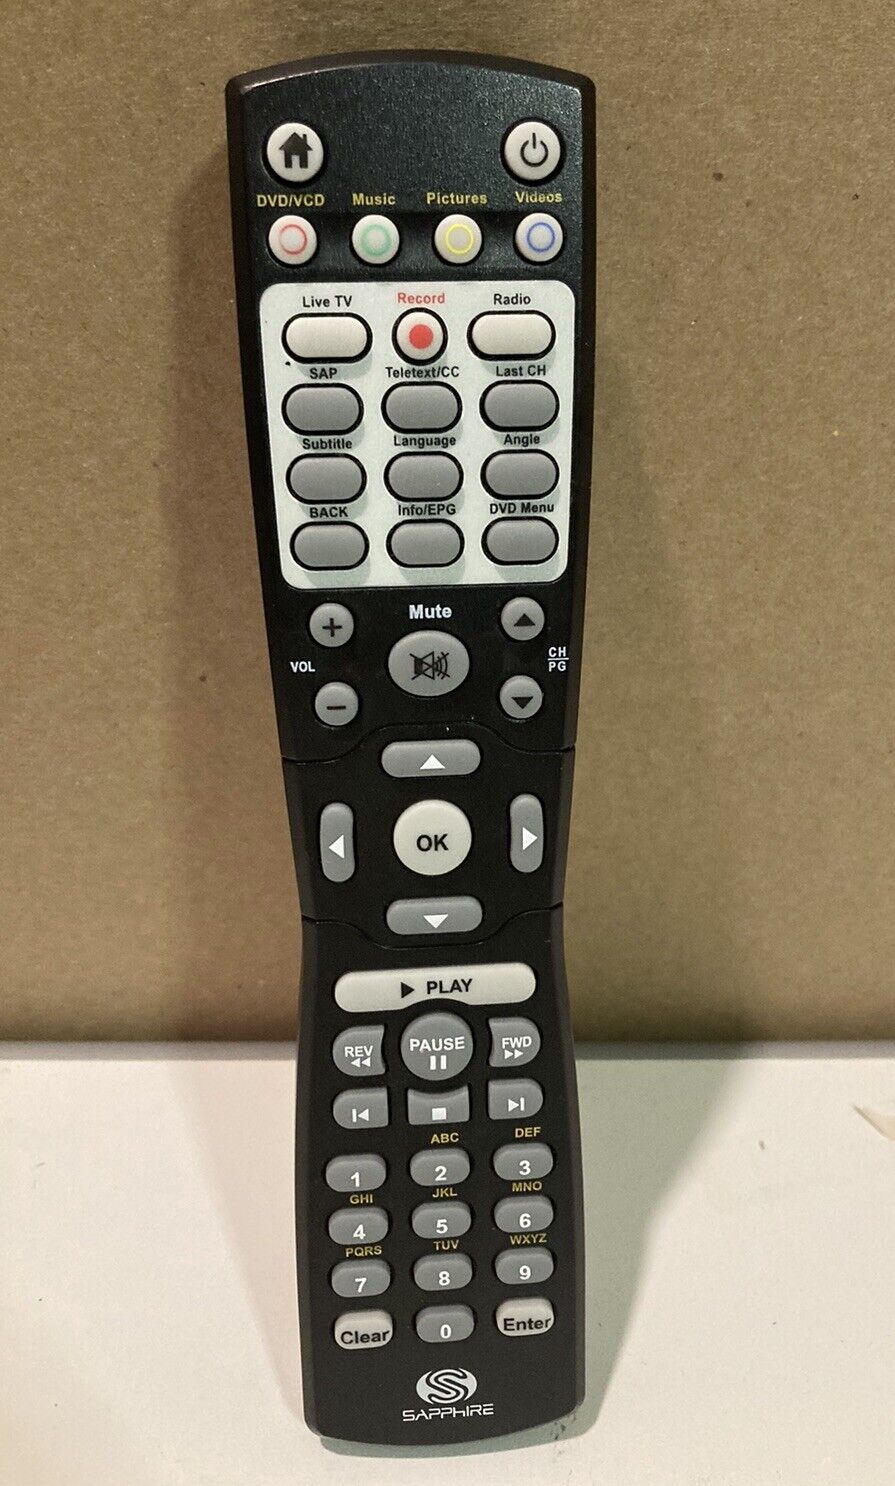 Genuine OEM Sapphire Remote Control ONLY for TV Tuner Card - Very Good - Tested